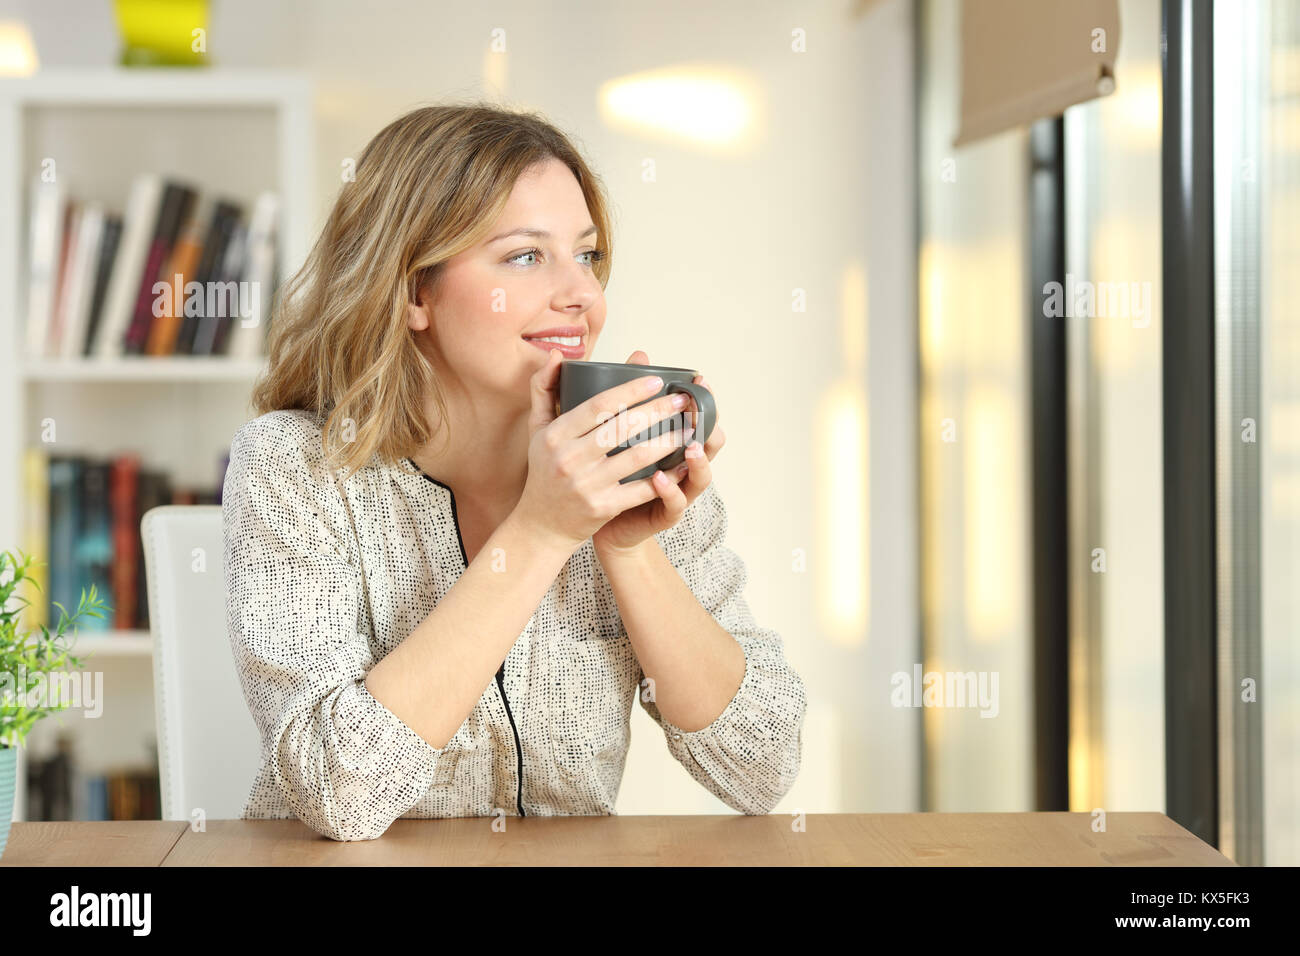 Portrait of a woman looking through a window drinking coffee sitting in a table at home Stock Photo